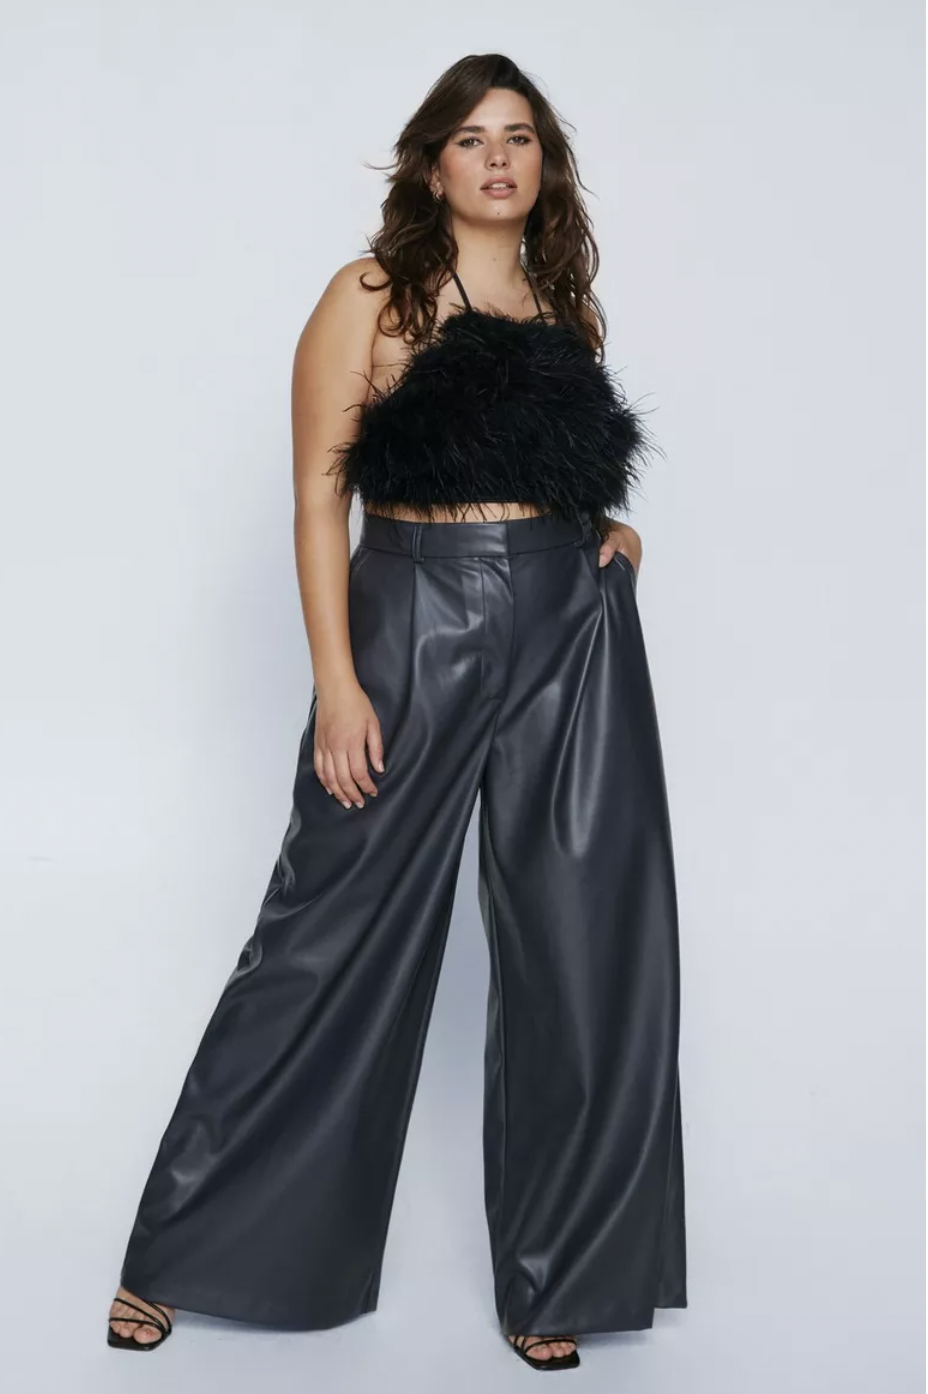 70+ Best Leather Pants Outfits We Can't Wait To Copy 2022